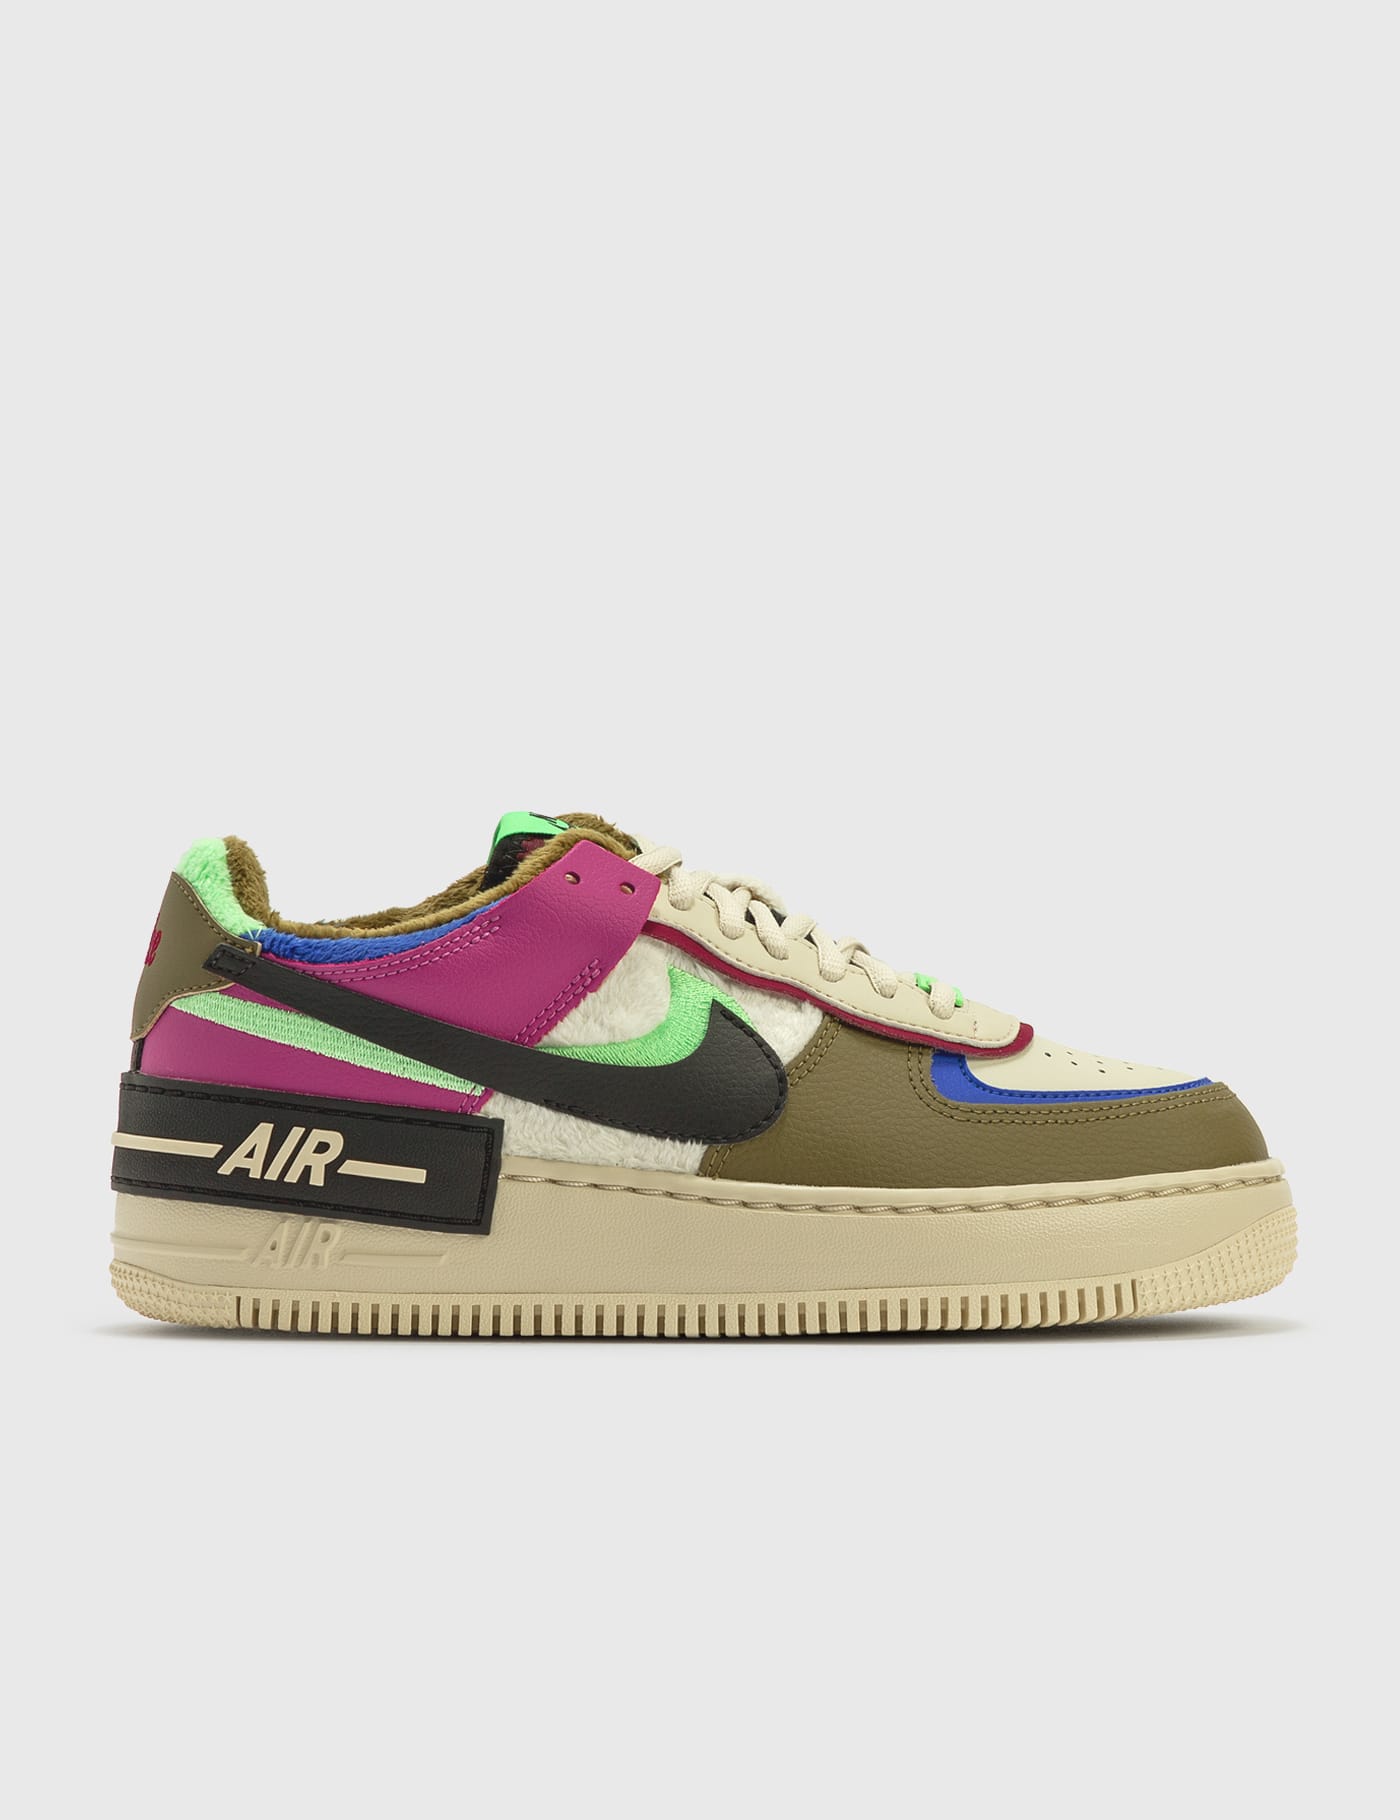 air force 1 shadow olive